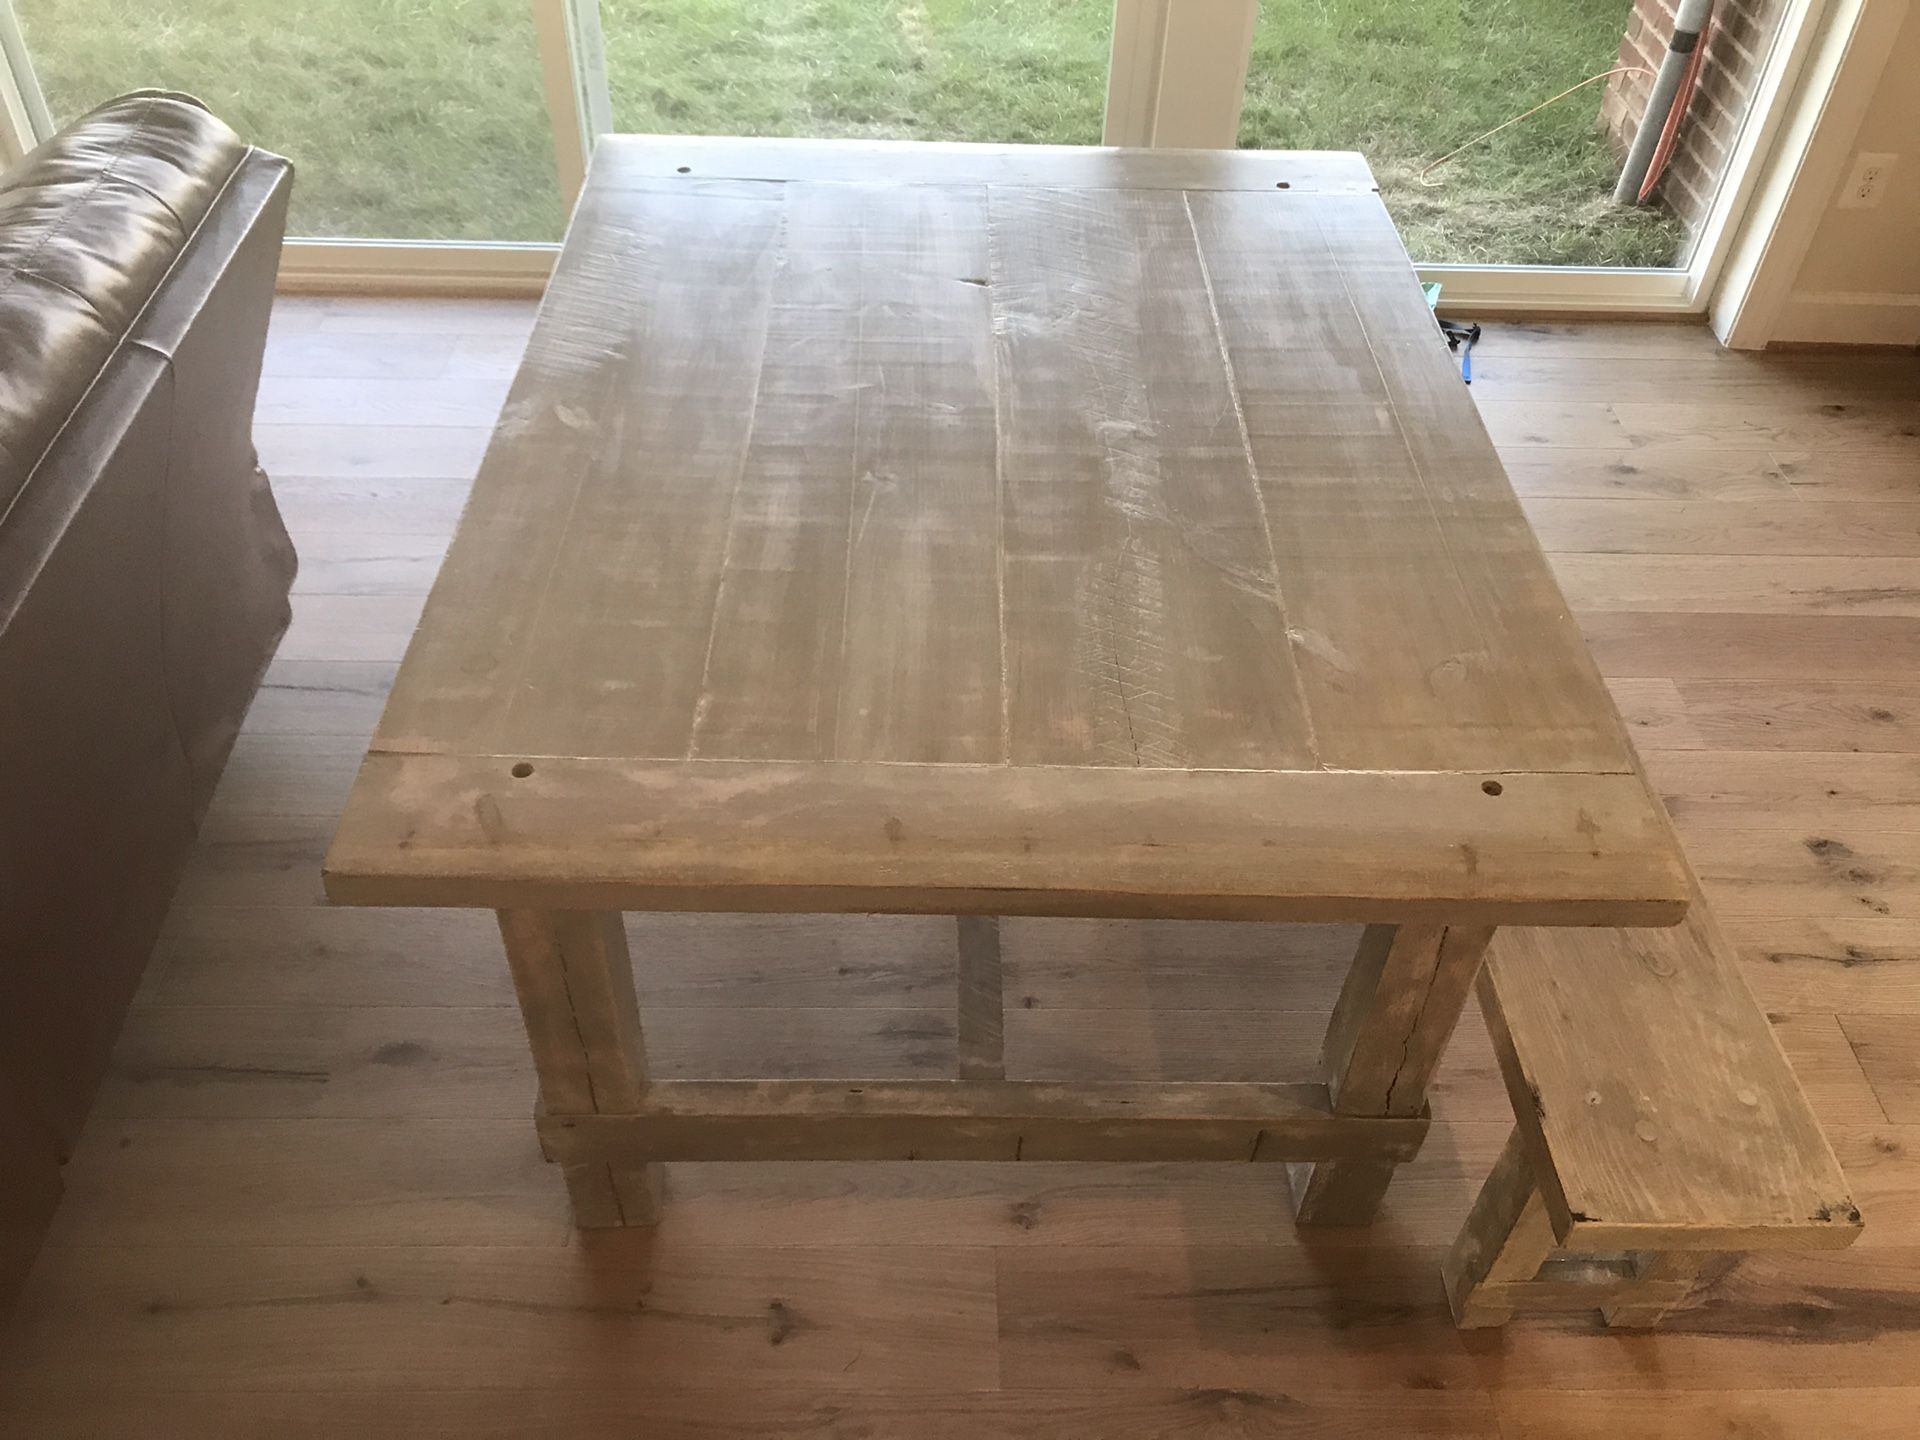 Rustic reclaimed kitchen table